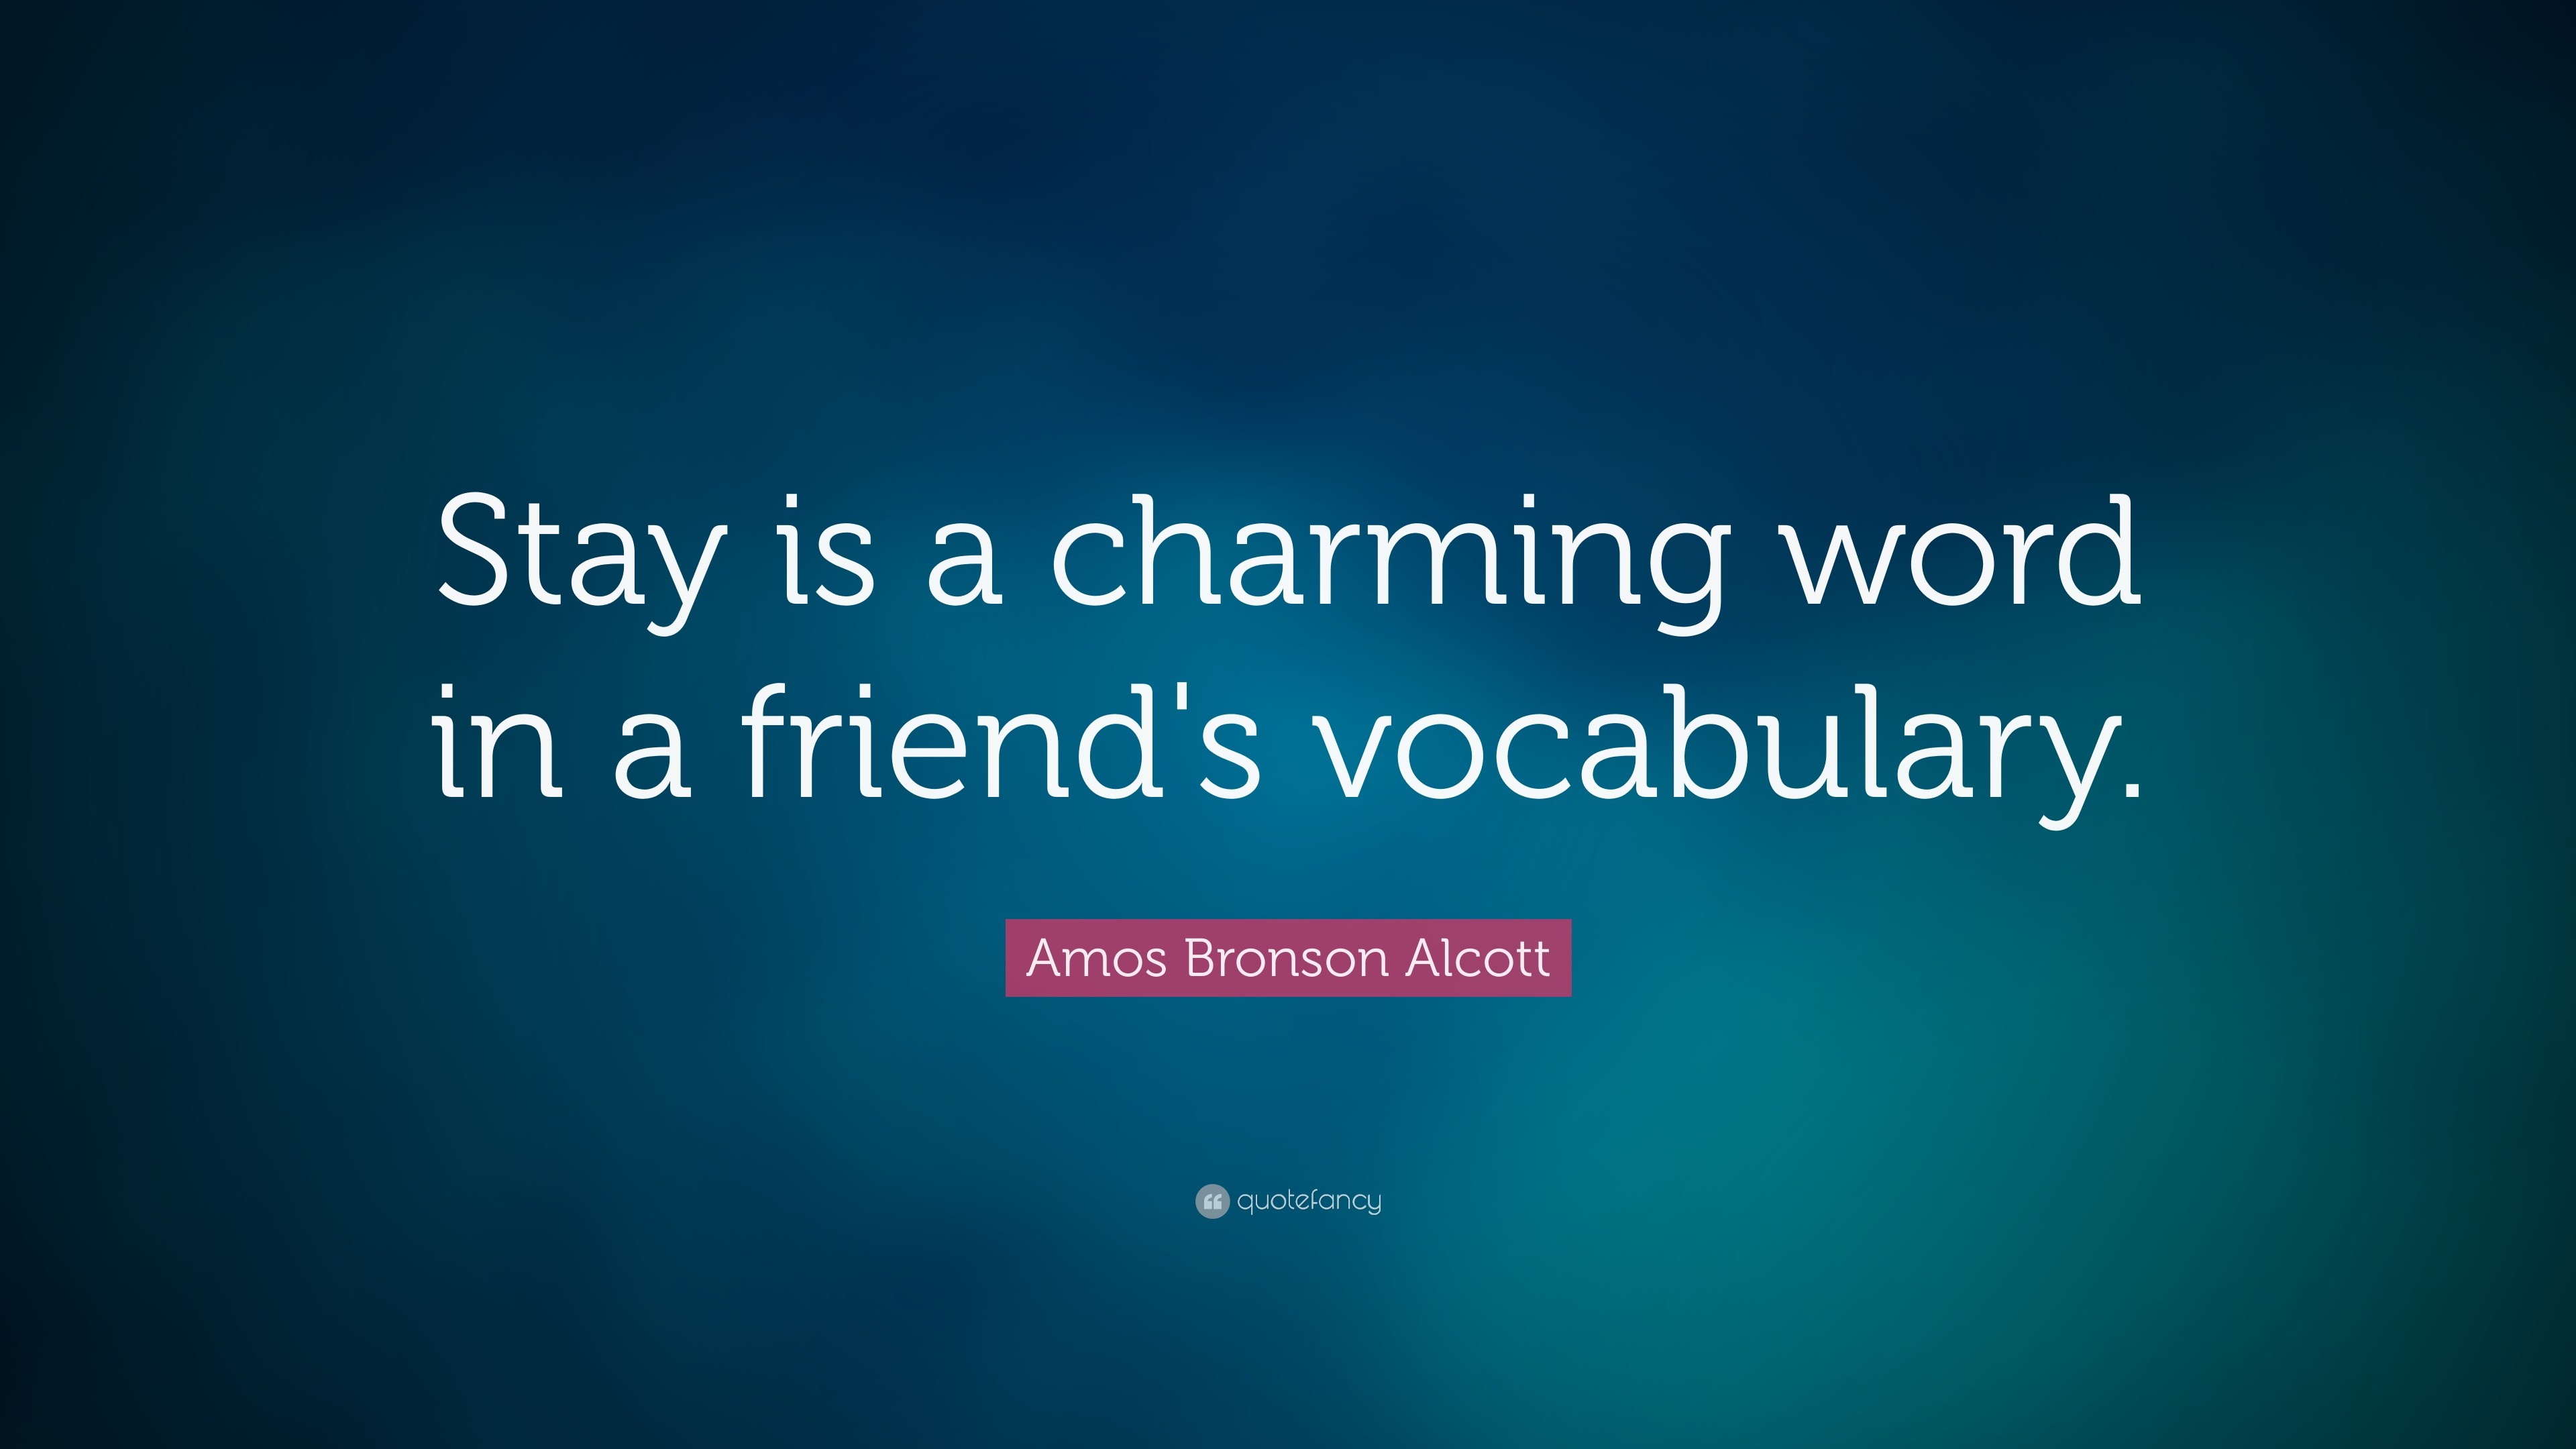 3840x2160 Friendship Quotes: “Stay is a charming word in a friend's vocabulary.” —